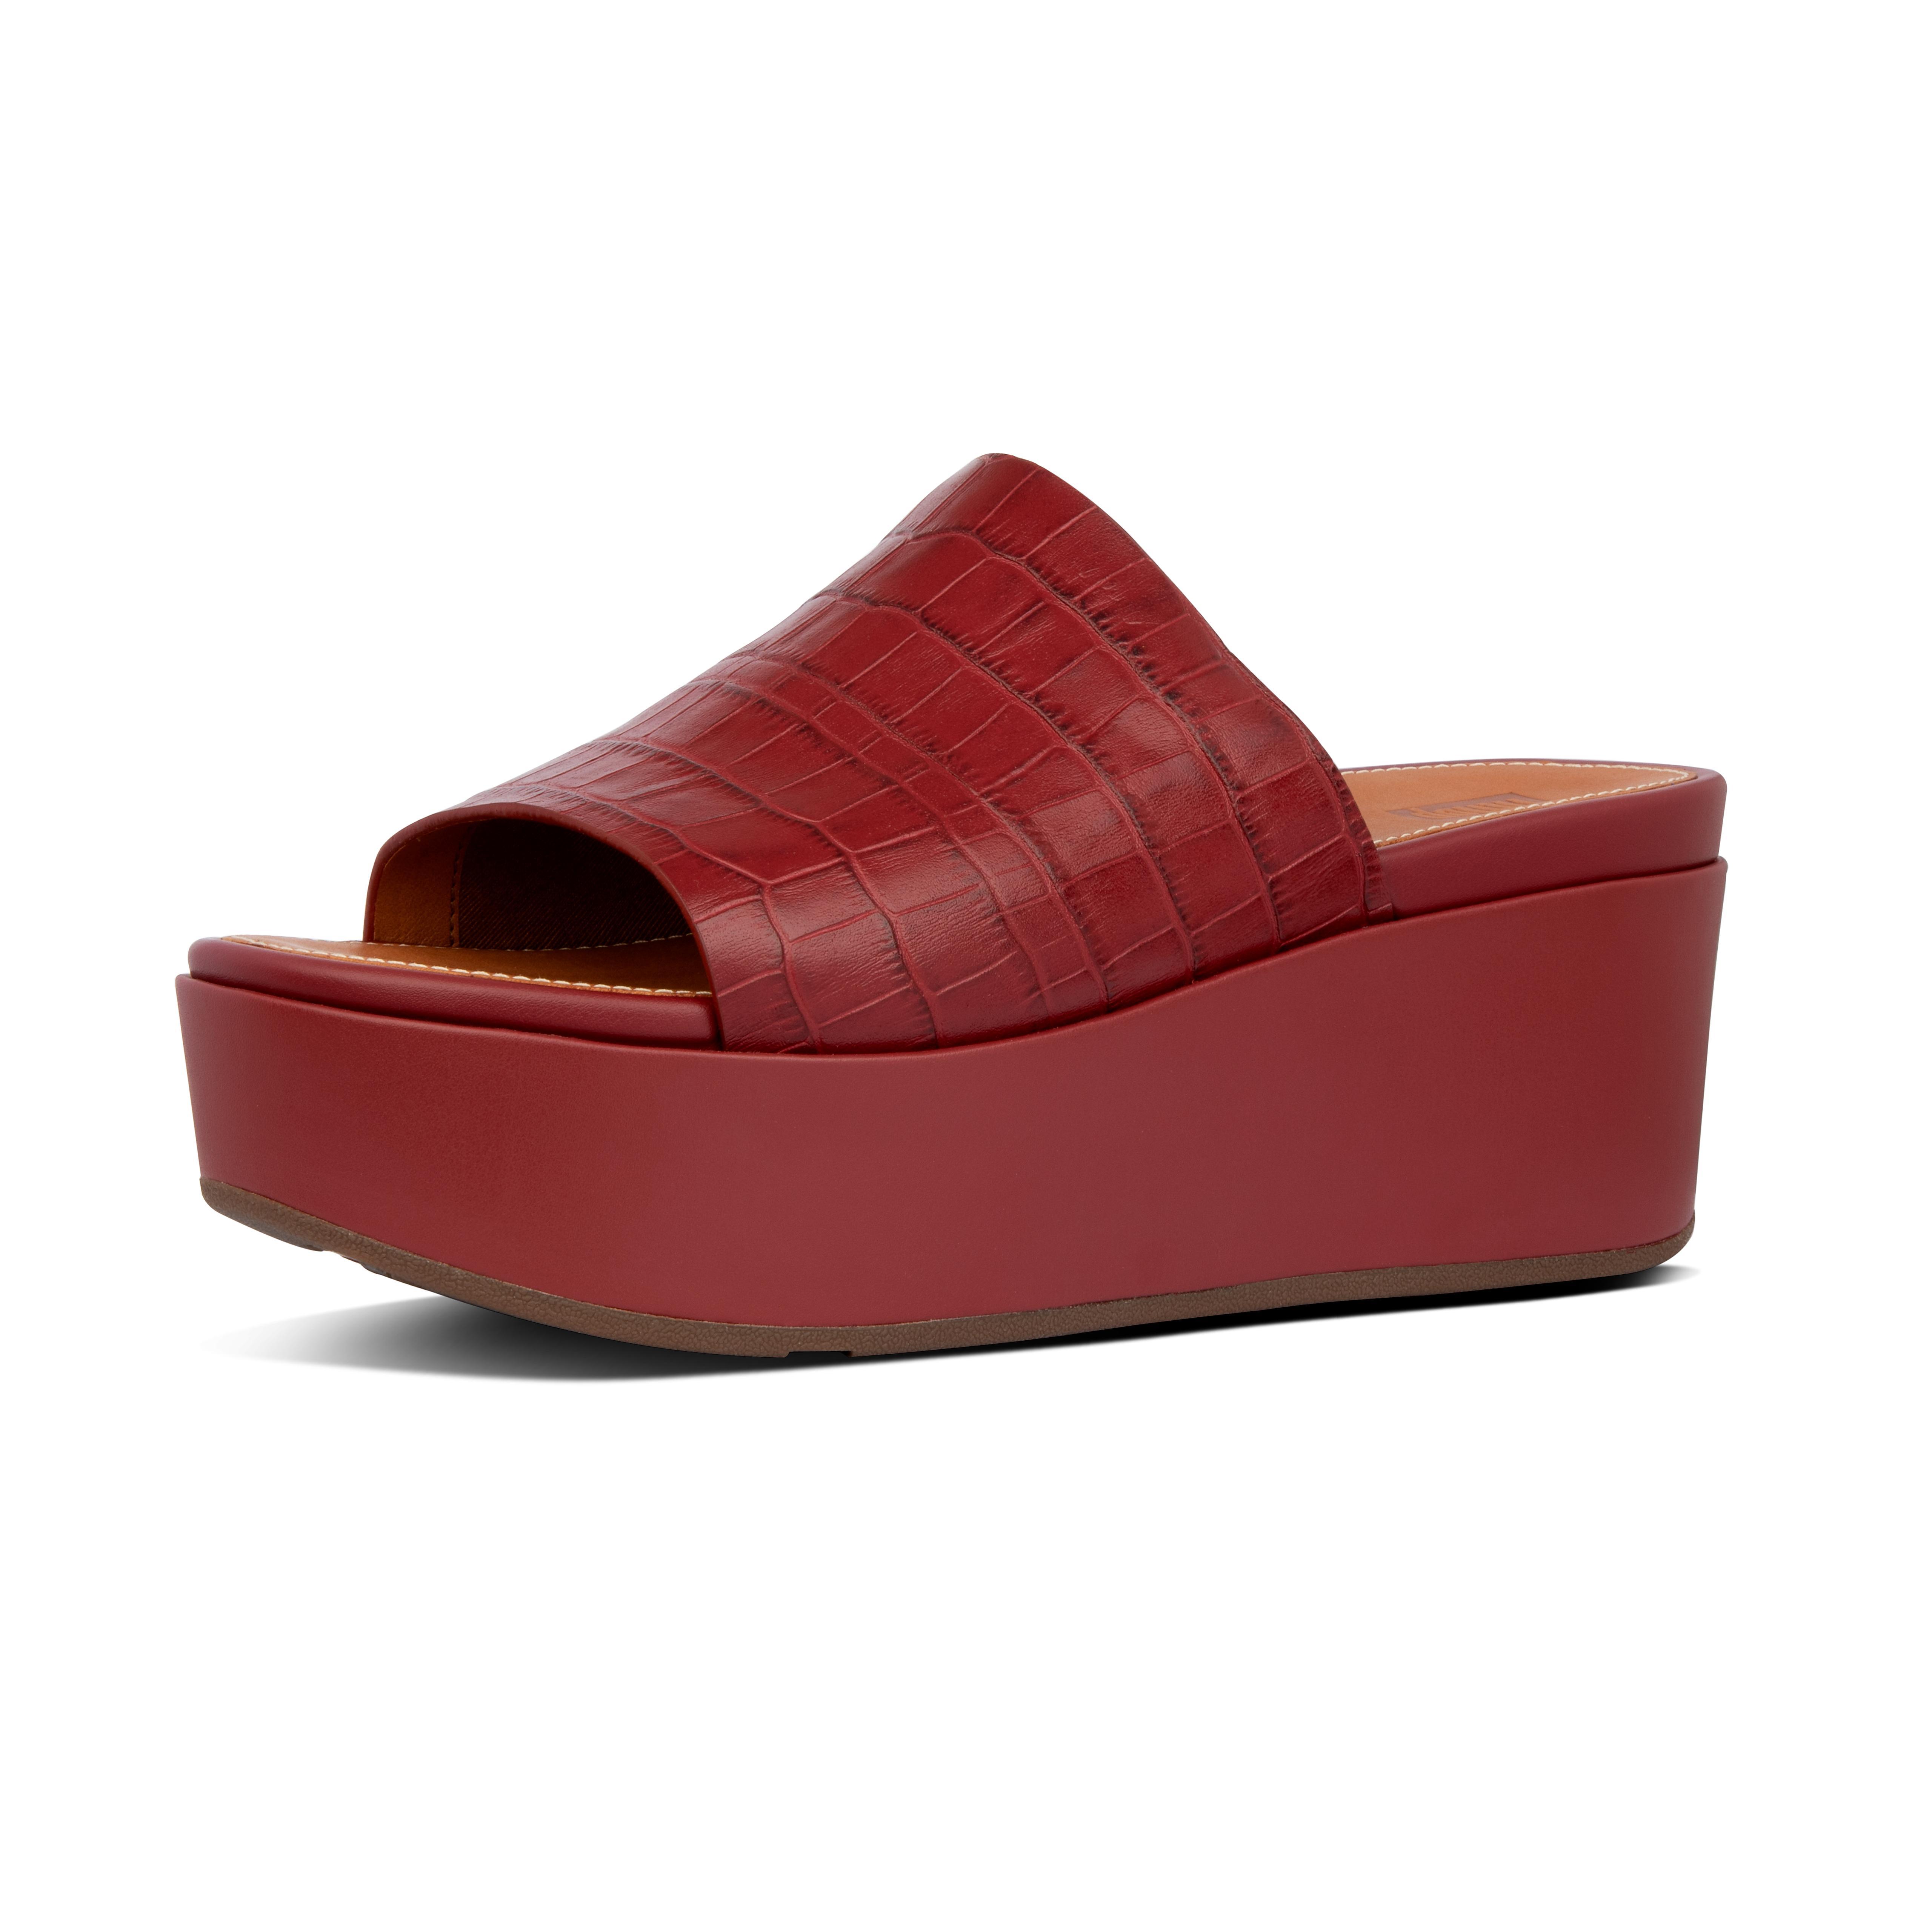 eloise fitflop sandals